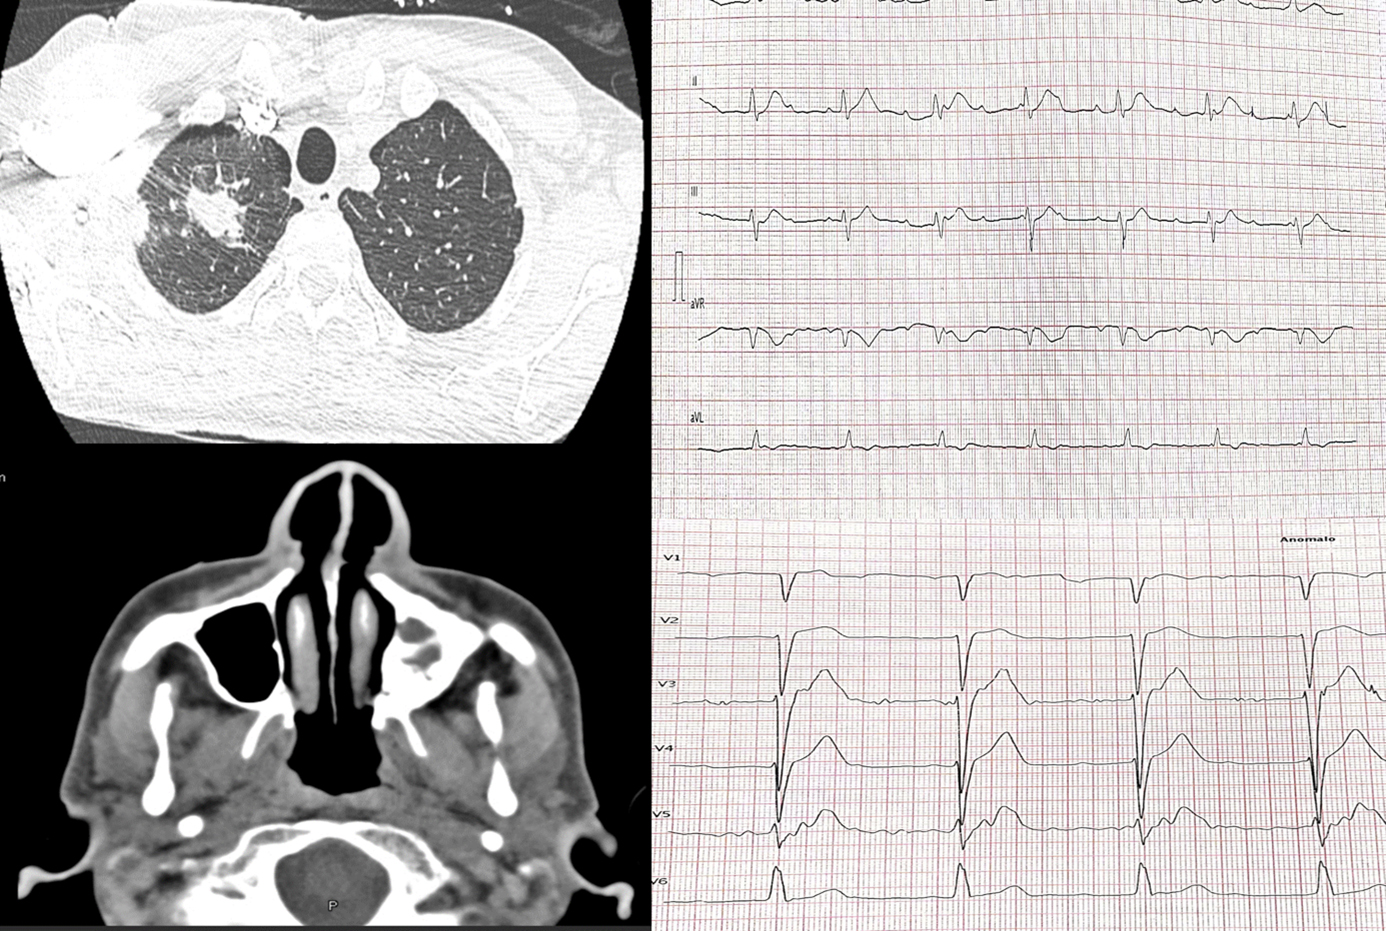 Complete heart block as a rare manifestation of granulomatosis with polyangitis: a case report